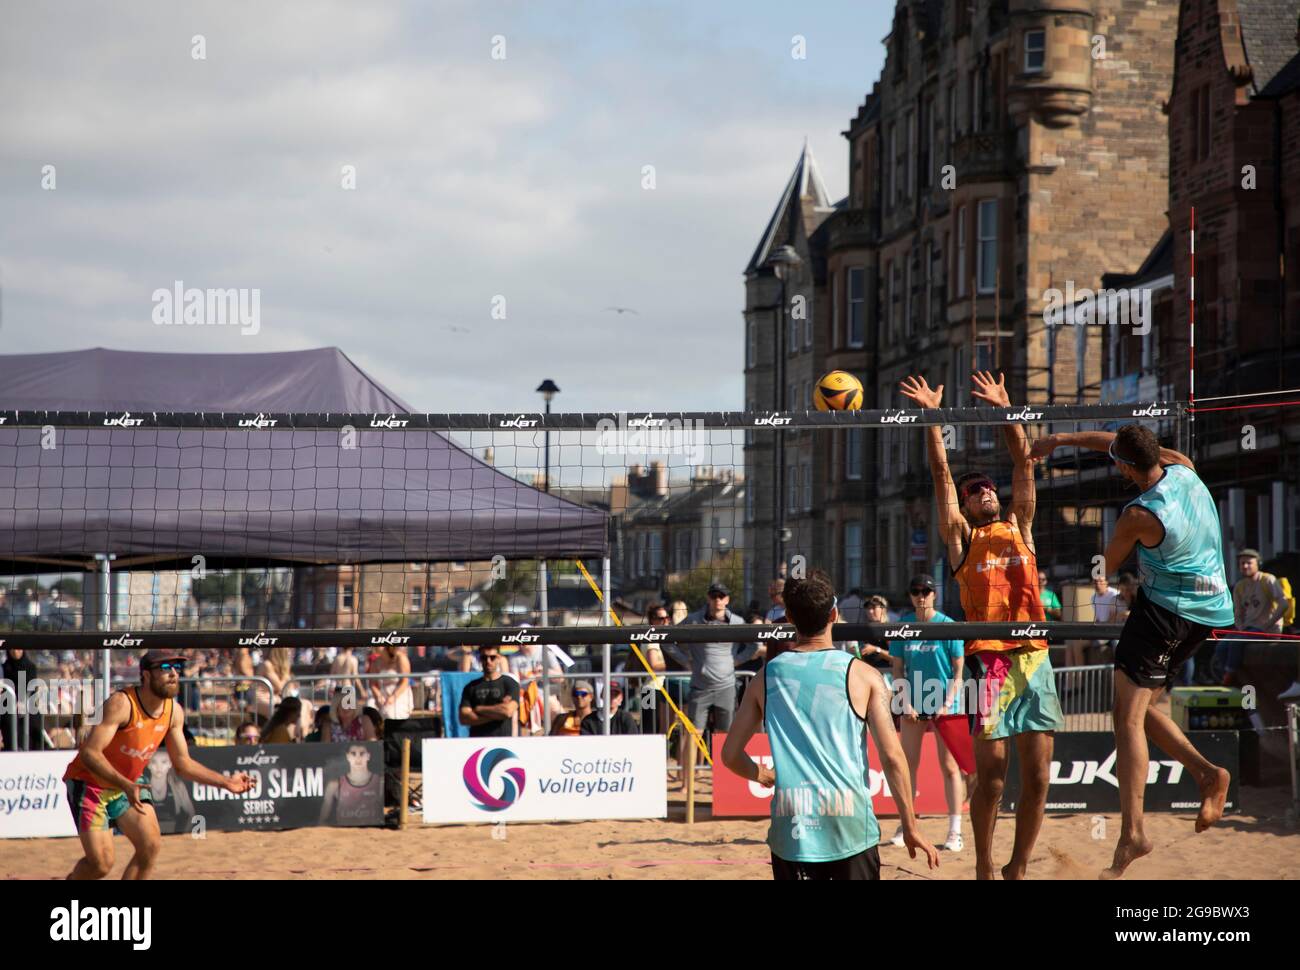 Portobello, Edinburgh, Scotland, UK. 25th July 2021. UKBT Grand Slam Series Volleyball 2021 men's final event which is delivered by Scottish Volleyball Association in partnership with UK Beach. Winners (blue) Rendon Peiro/Maggio Vs Dunbavin/Walrond, This is due to Dunbavin getting injured in Final set and having to concede. Credit: Arch White/Alamy Live News Stock Photo